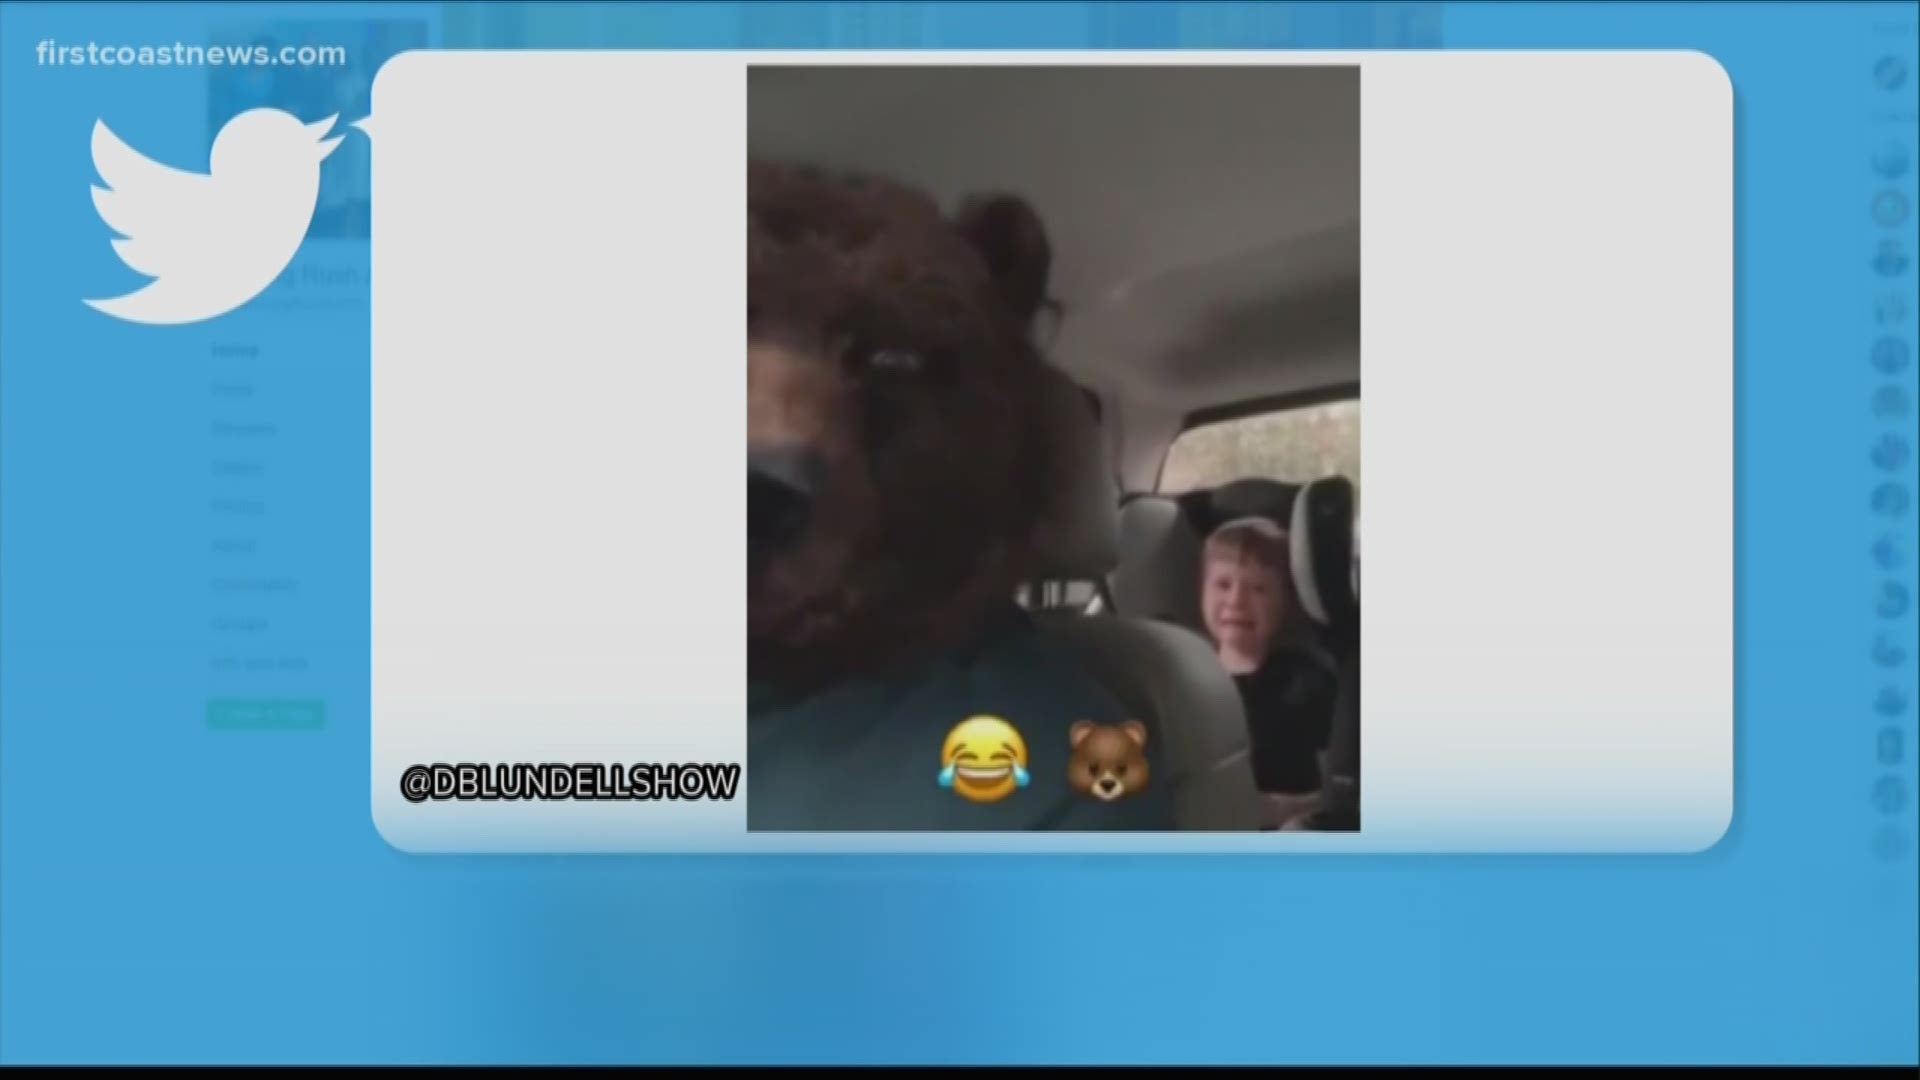 This dad was playing with Snapchat filters when he stumbled across one that made him look like a bear. His son though was not amused.